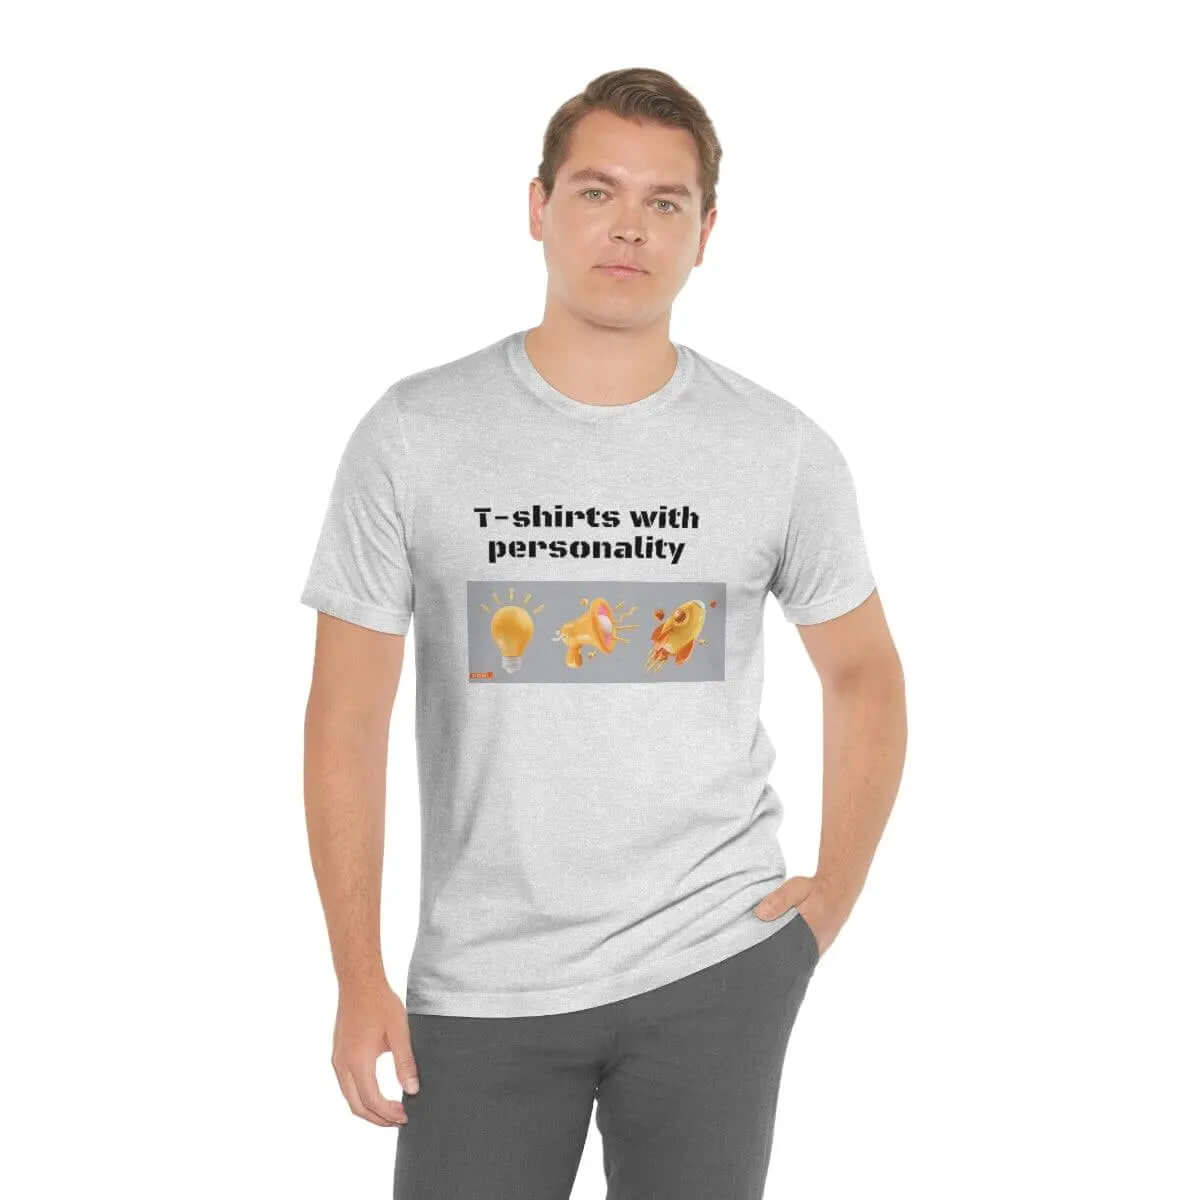 This T-shirt for people with personality is a unique custom t-shirt designed for people with personality. We source products from different brands, design and order the design to be printed with the help of renowned print-on-demand suppliers.